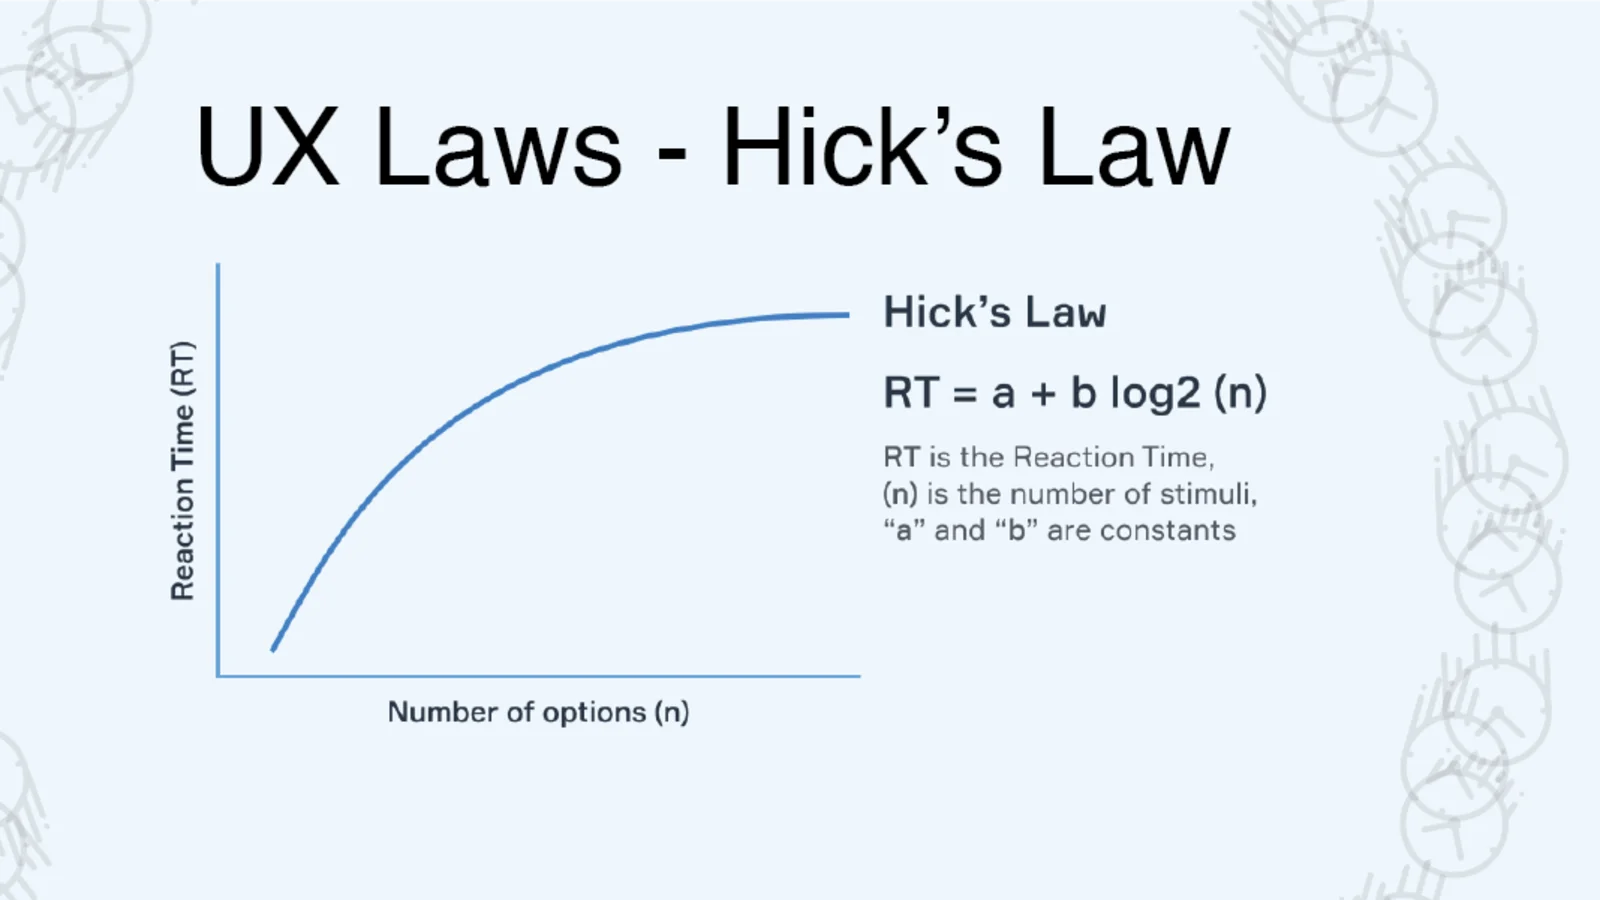 Tacktical Marketing | Full-Service Marketing Consulting Agency | Resources | News and Blog Posts | A Beginner's Guide to Automating Manual Marketing Processes | Image of Hicks Law Unveiled: Understanding Its Impact on UX Design